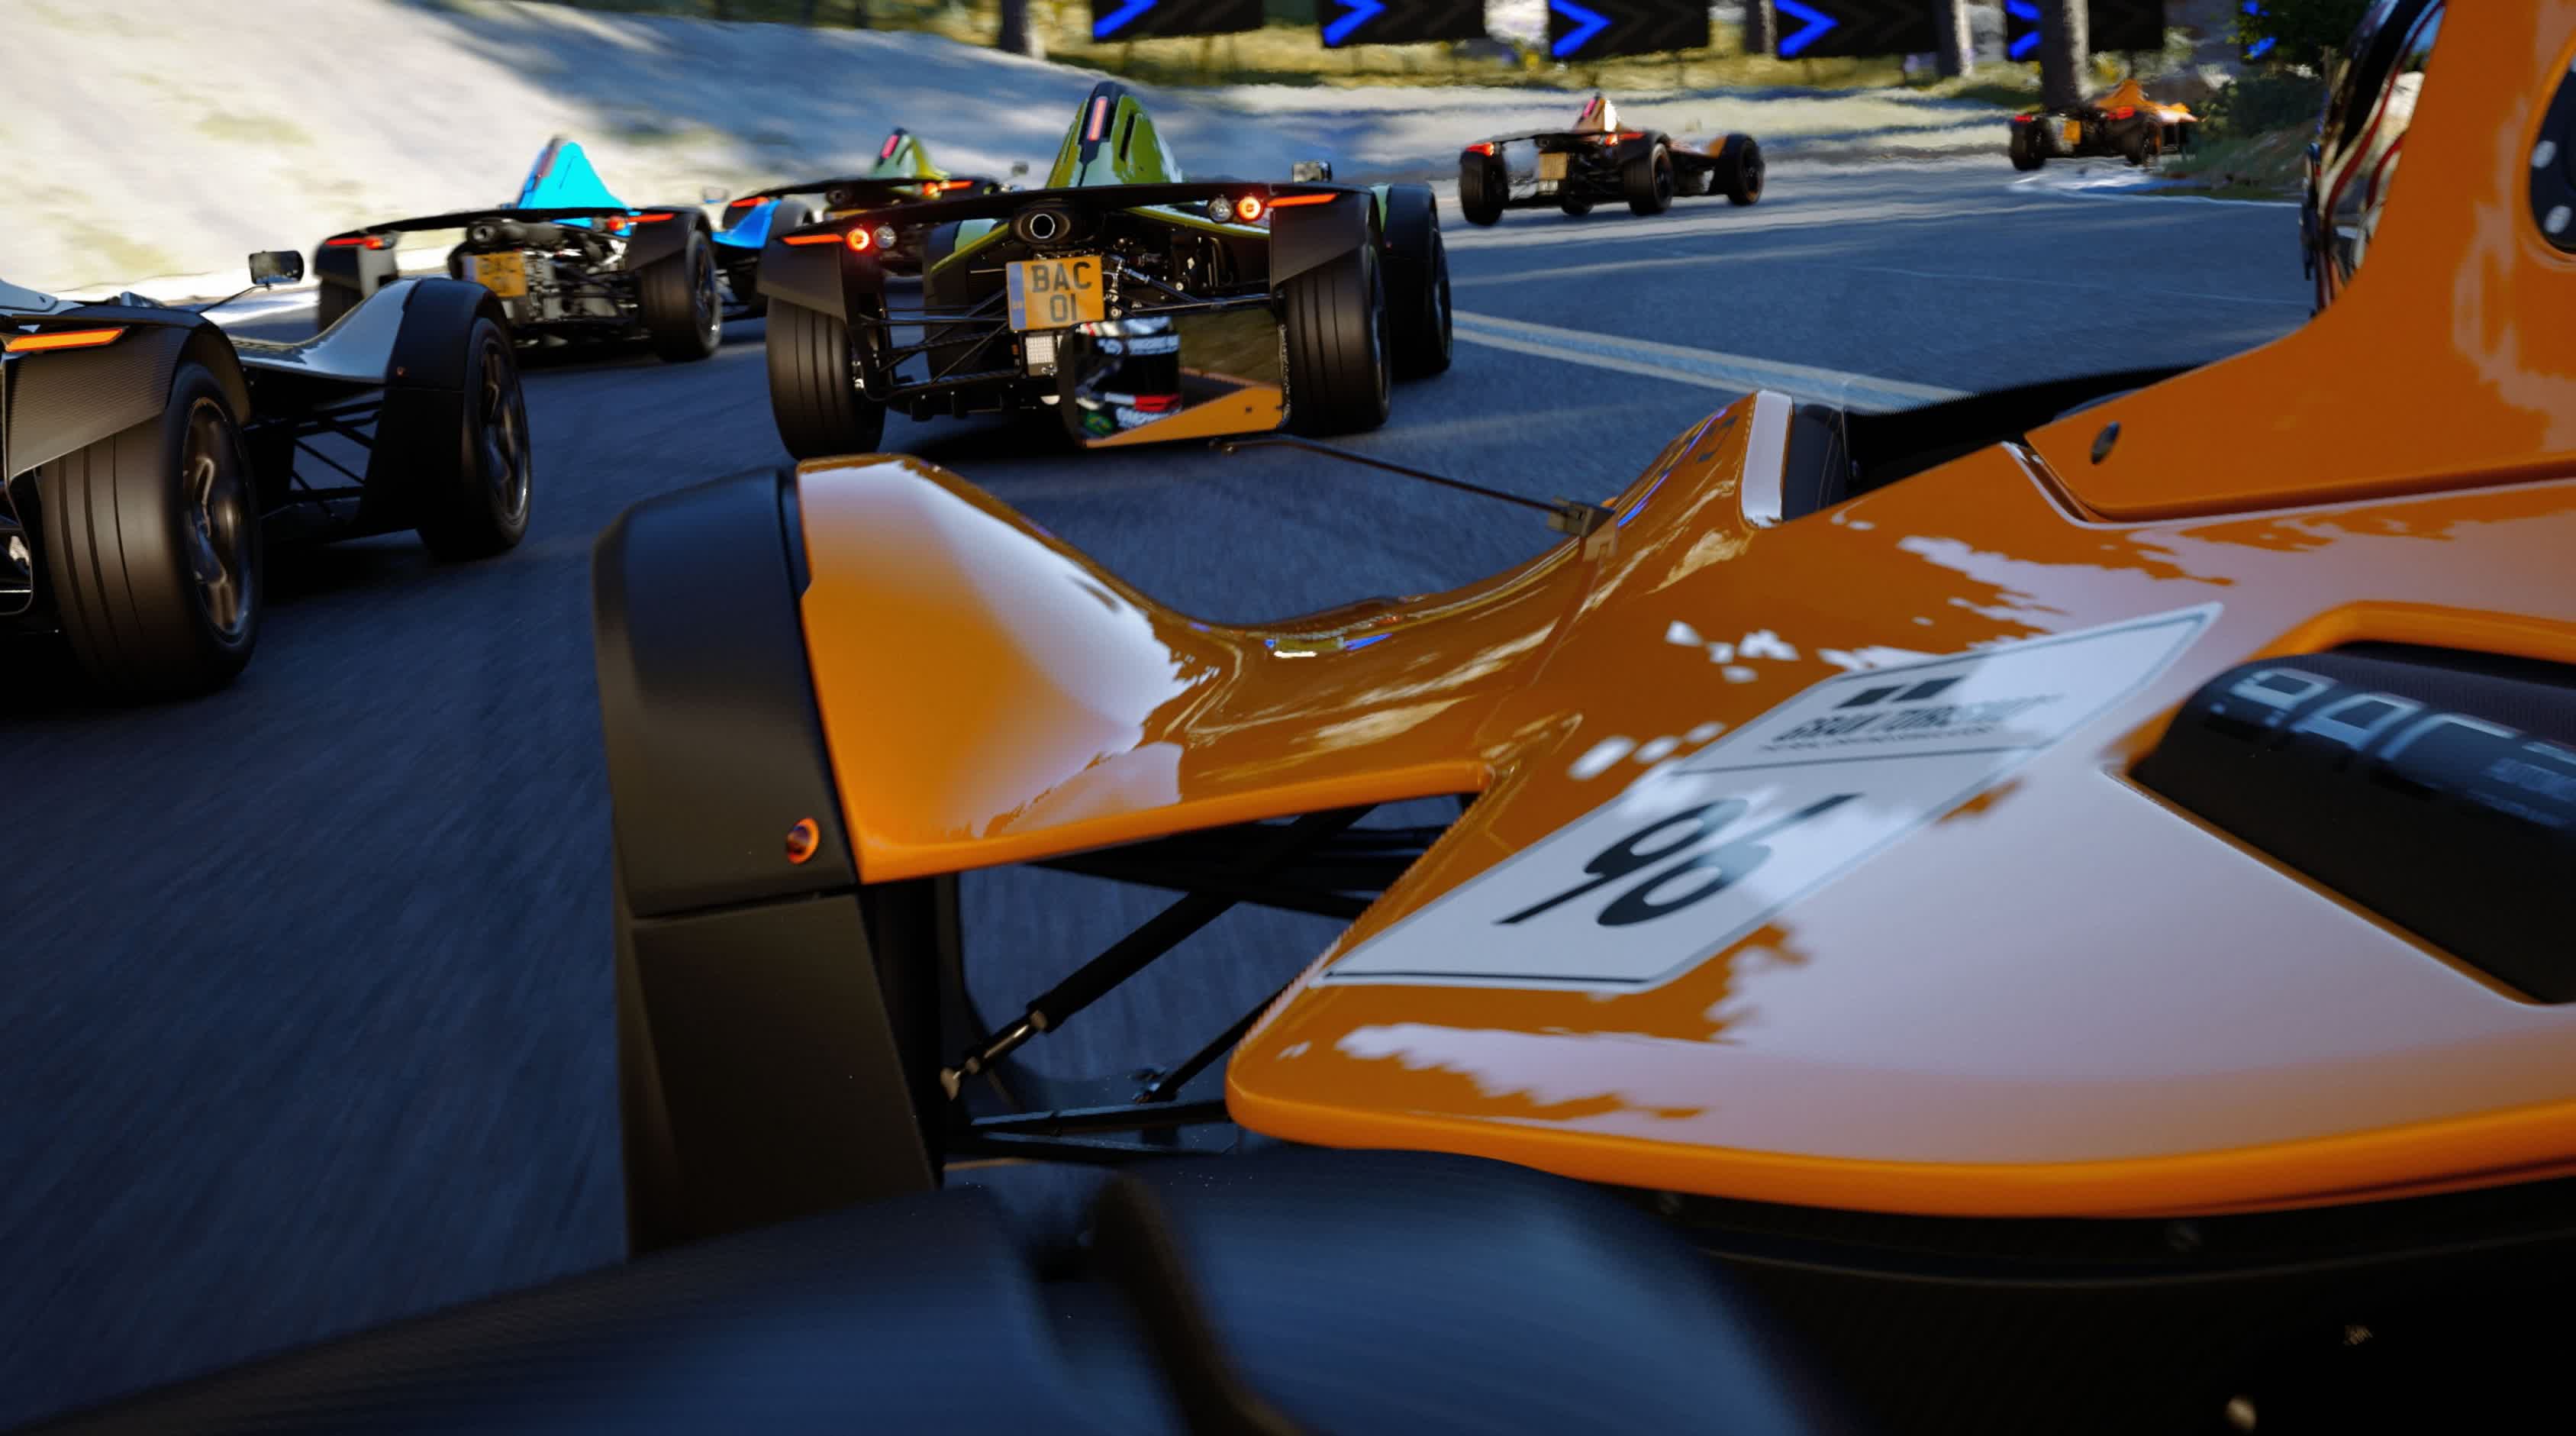 Gran Turismo 7 gets pushed back to 2022 due to pandemic-related production challenges